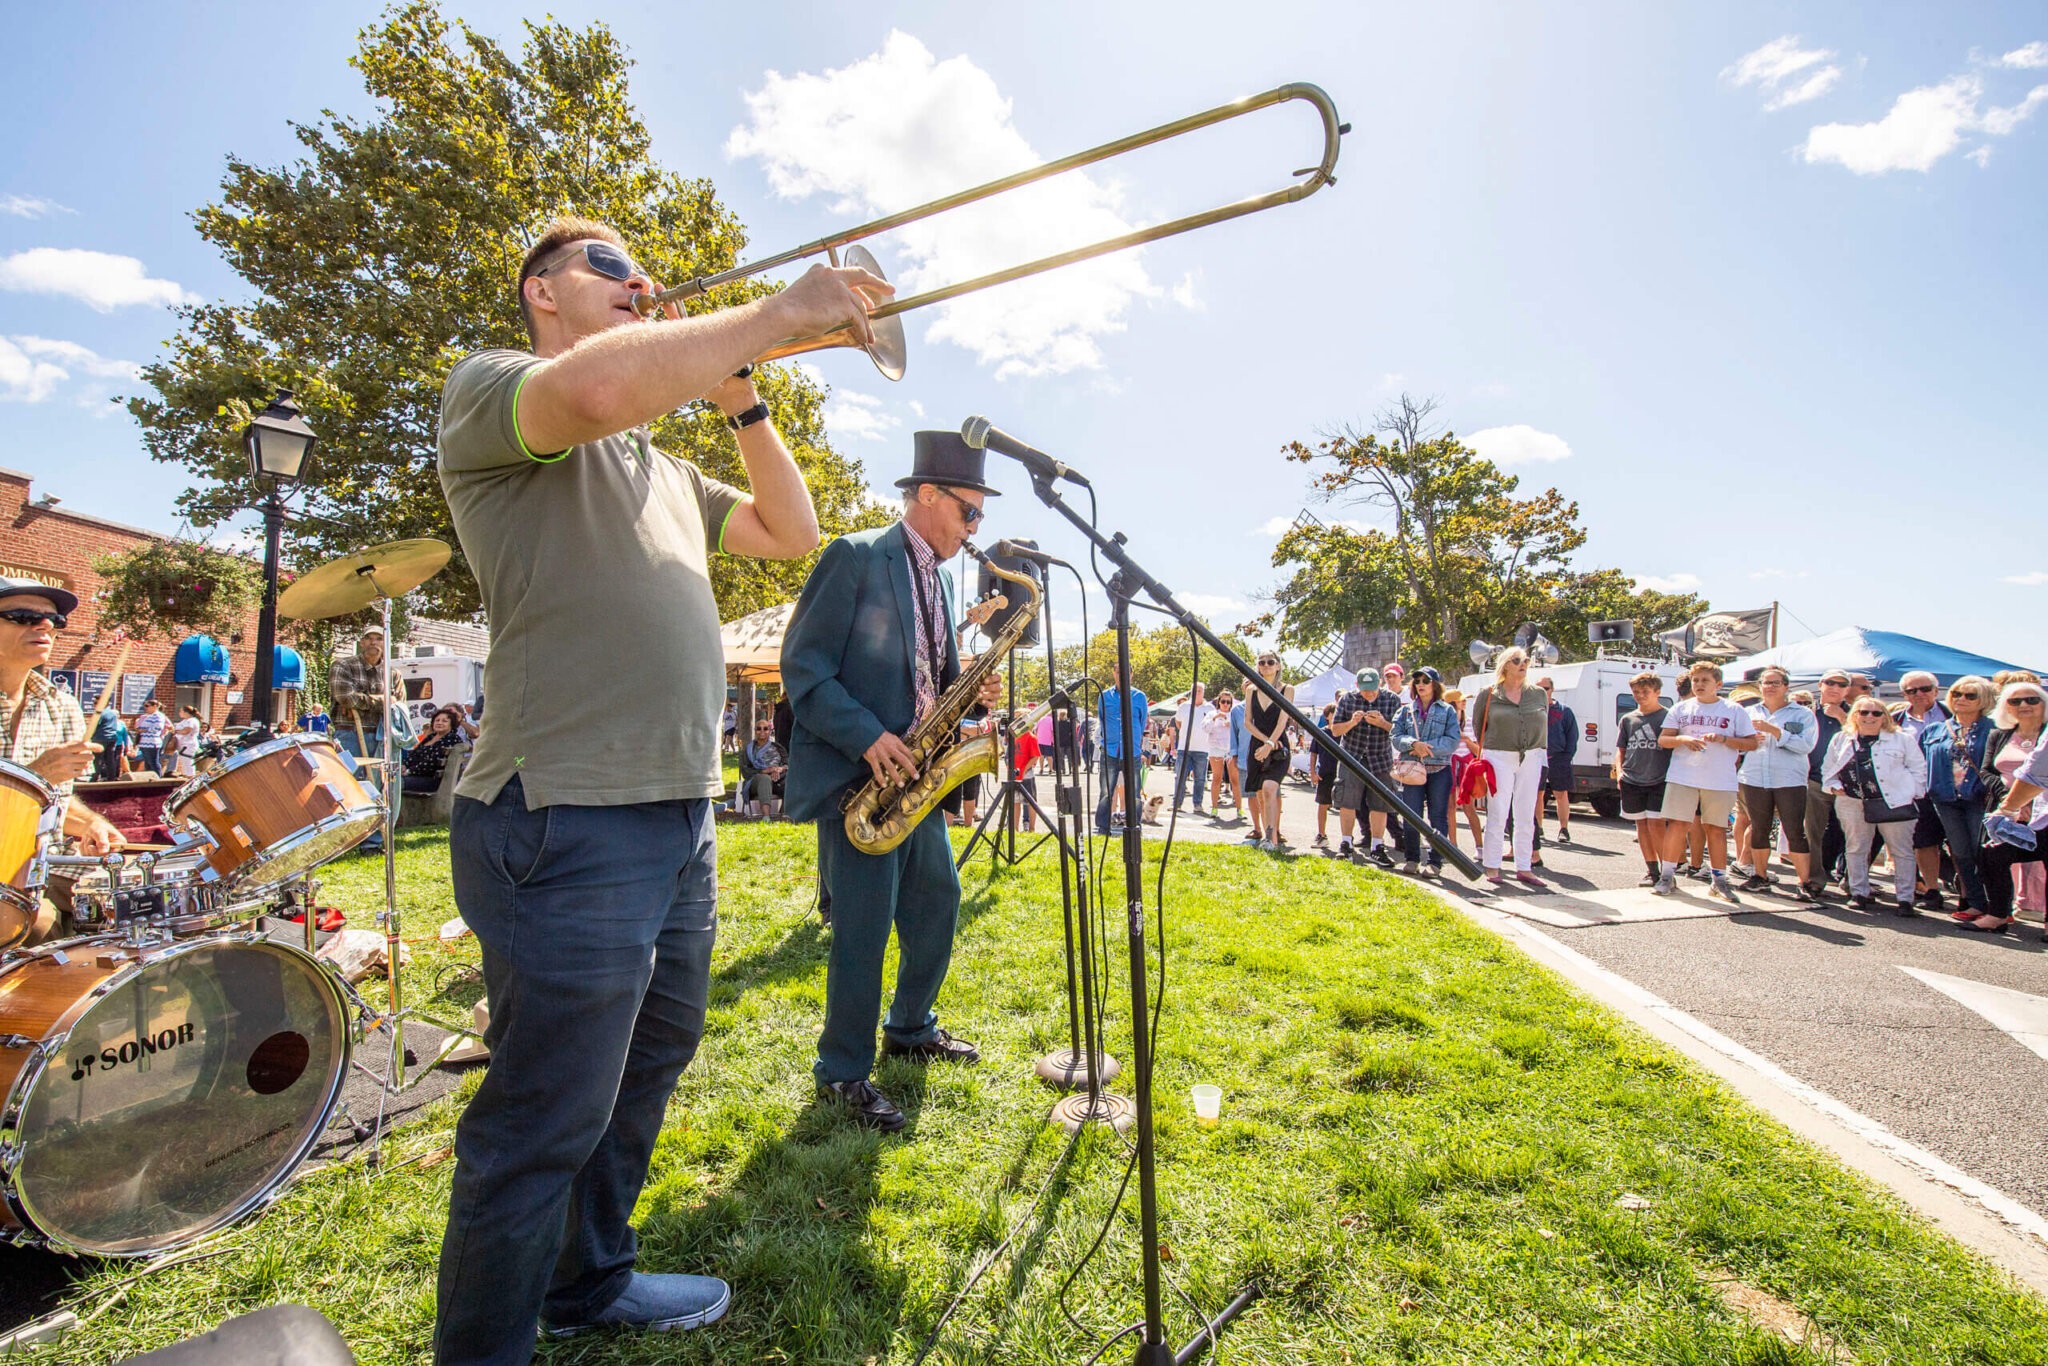 HarborFest is jam-packed with free music performances.